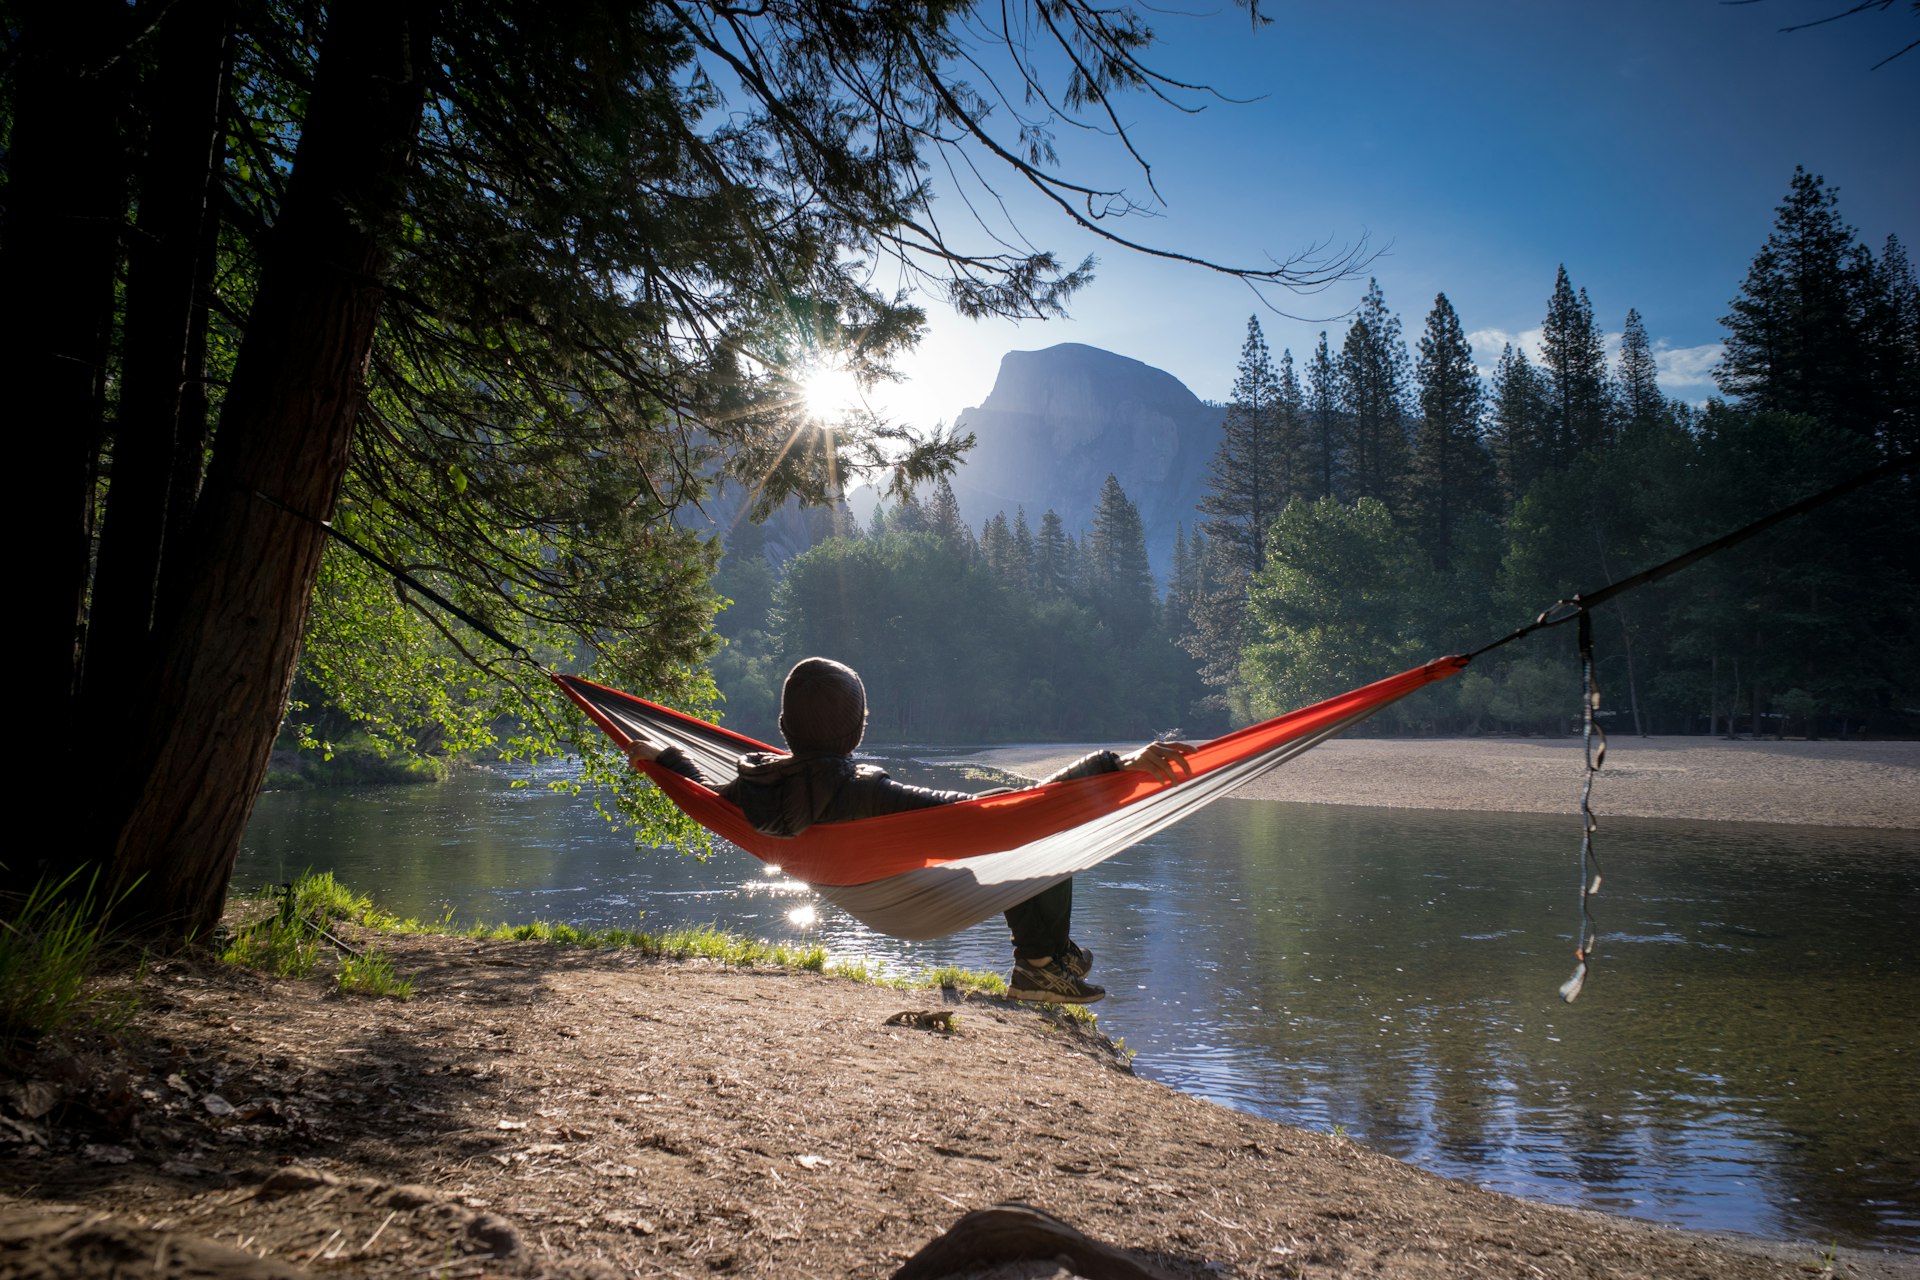 Hiker in a hammock strung between two trees looks out at a lake